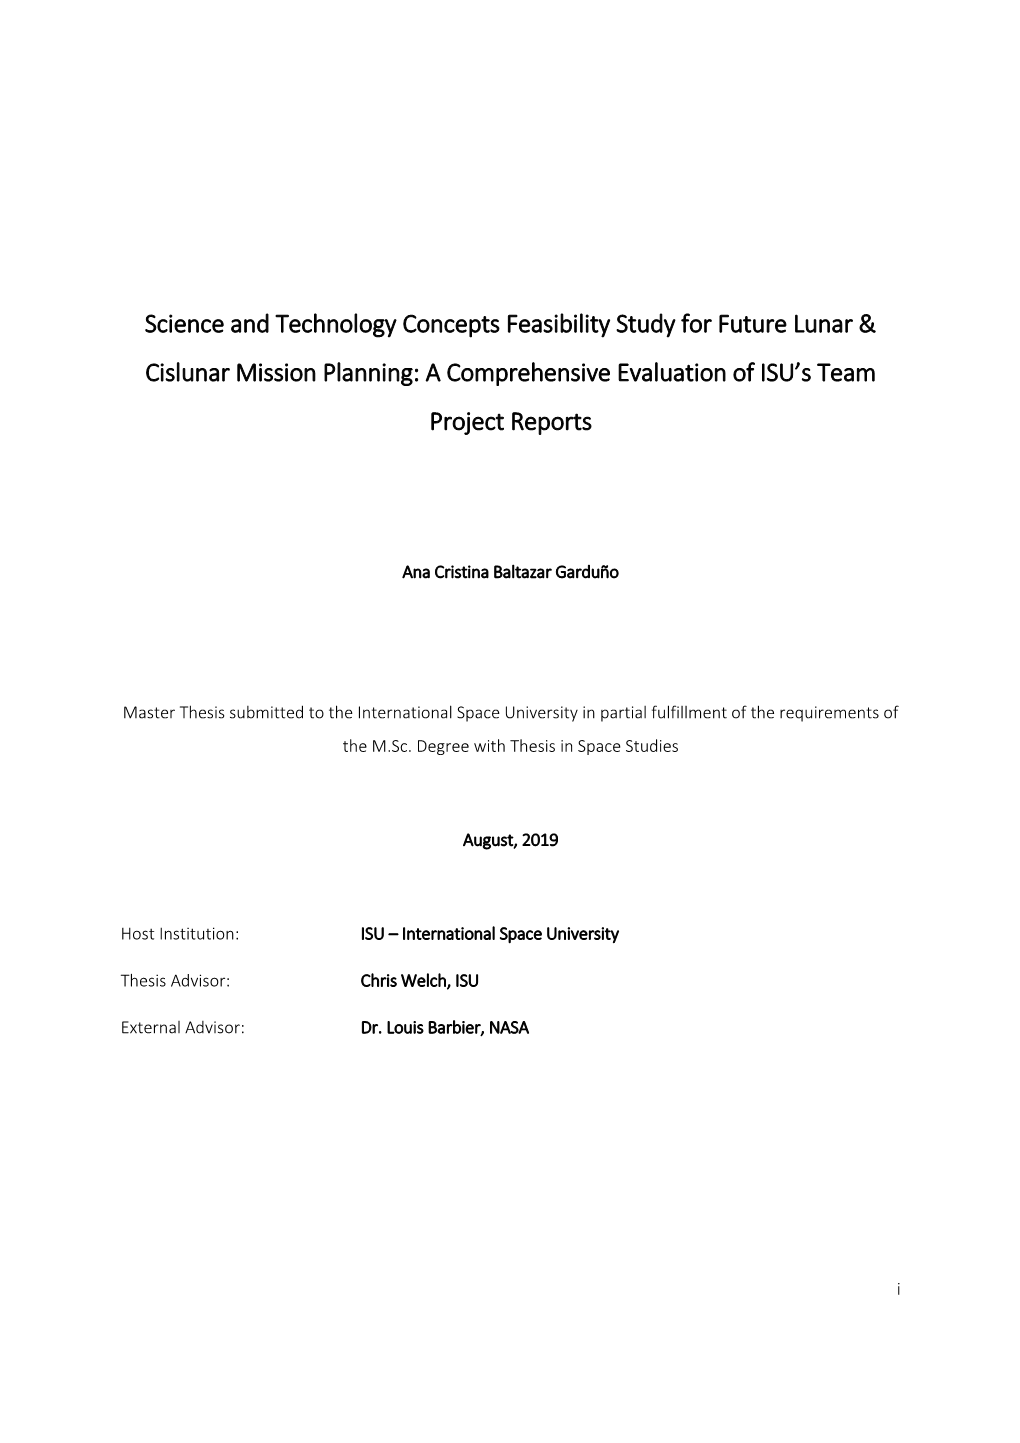 Science and Technology Concepts Feasibility Study for Future Lunar & Cislunar Mission Planning